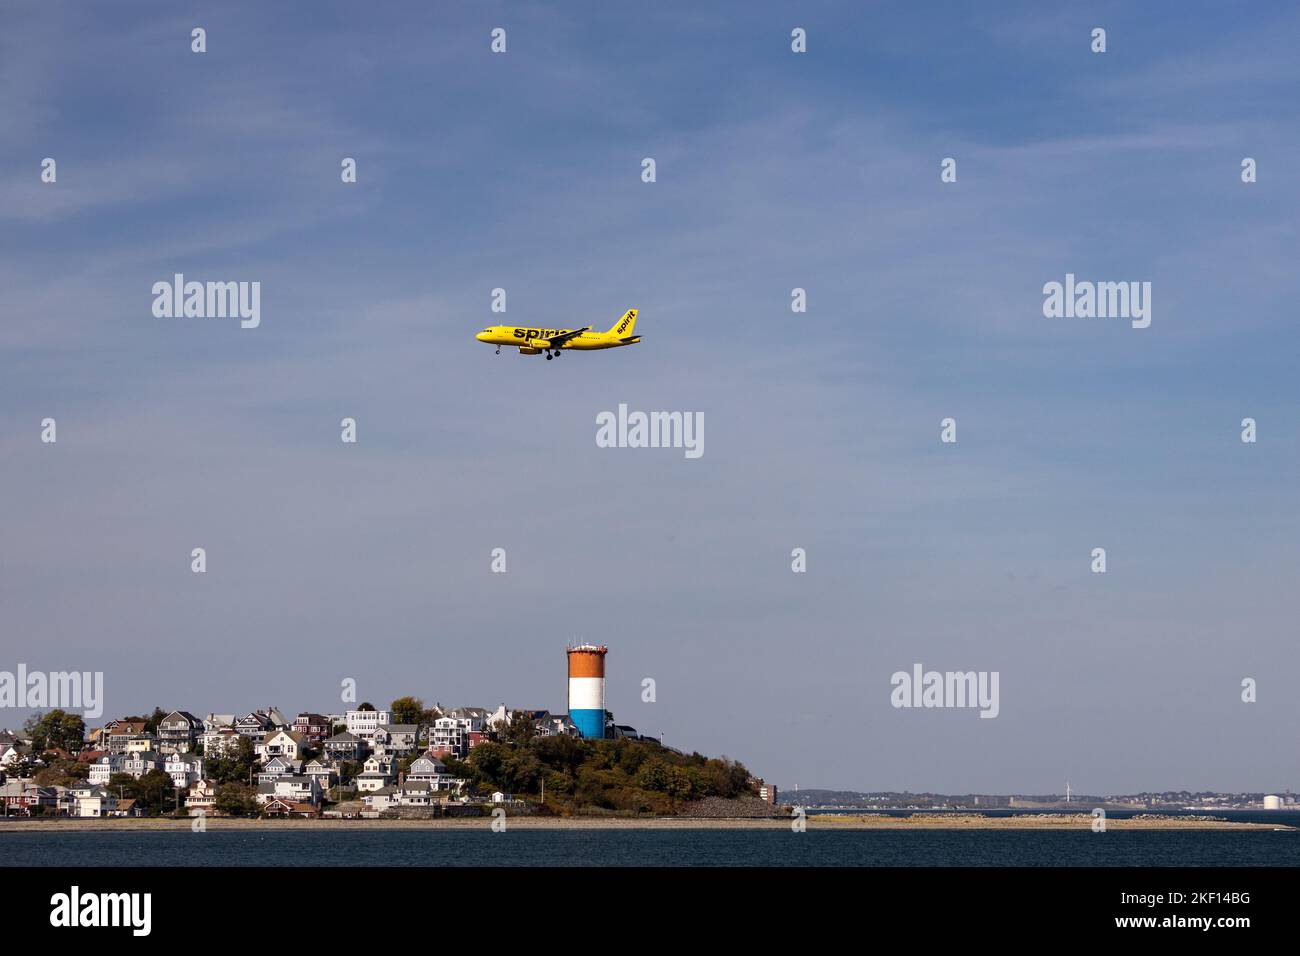 A Spirit Airlines plane flying over a beach before landing in Boston Stock Photo